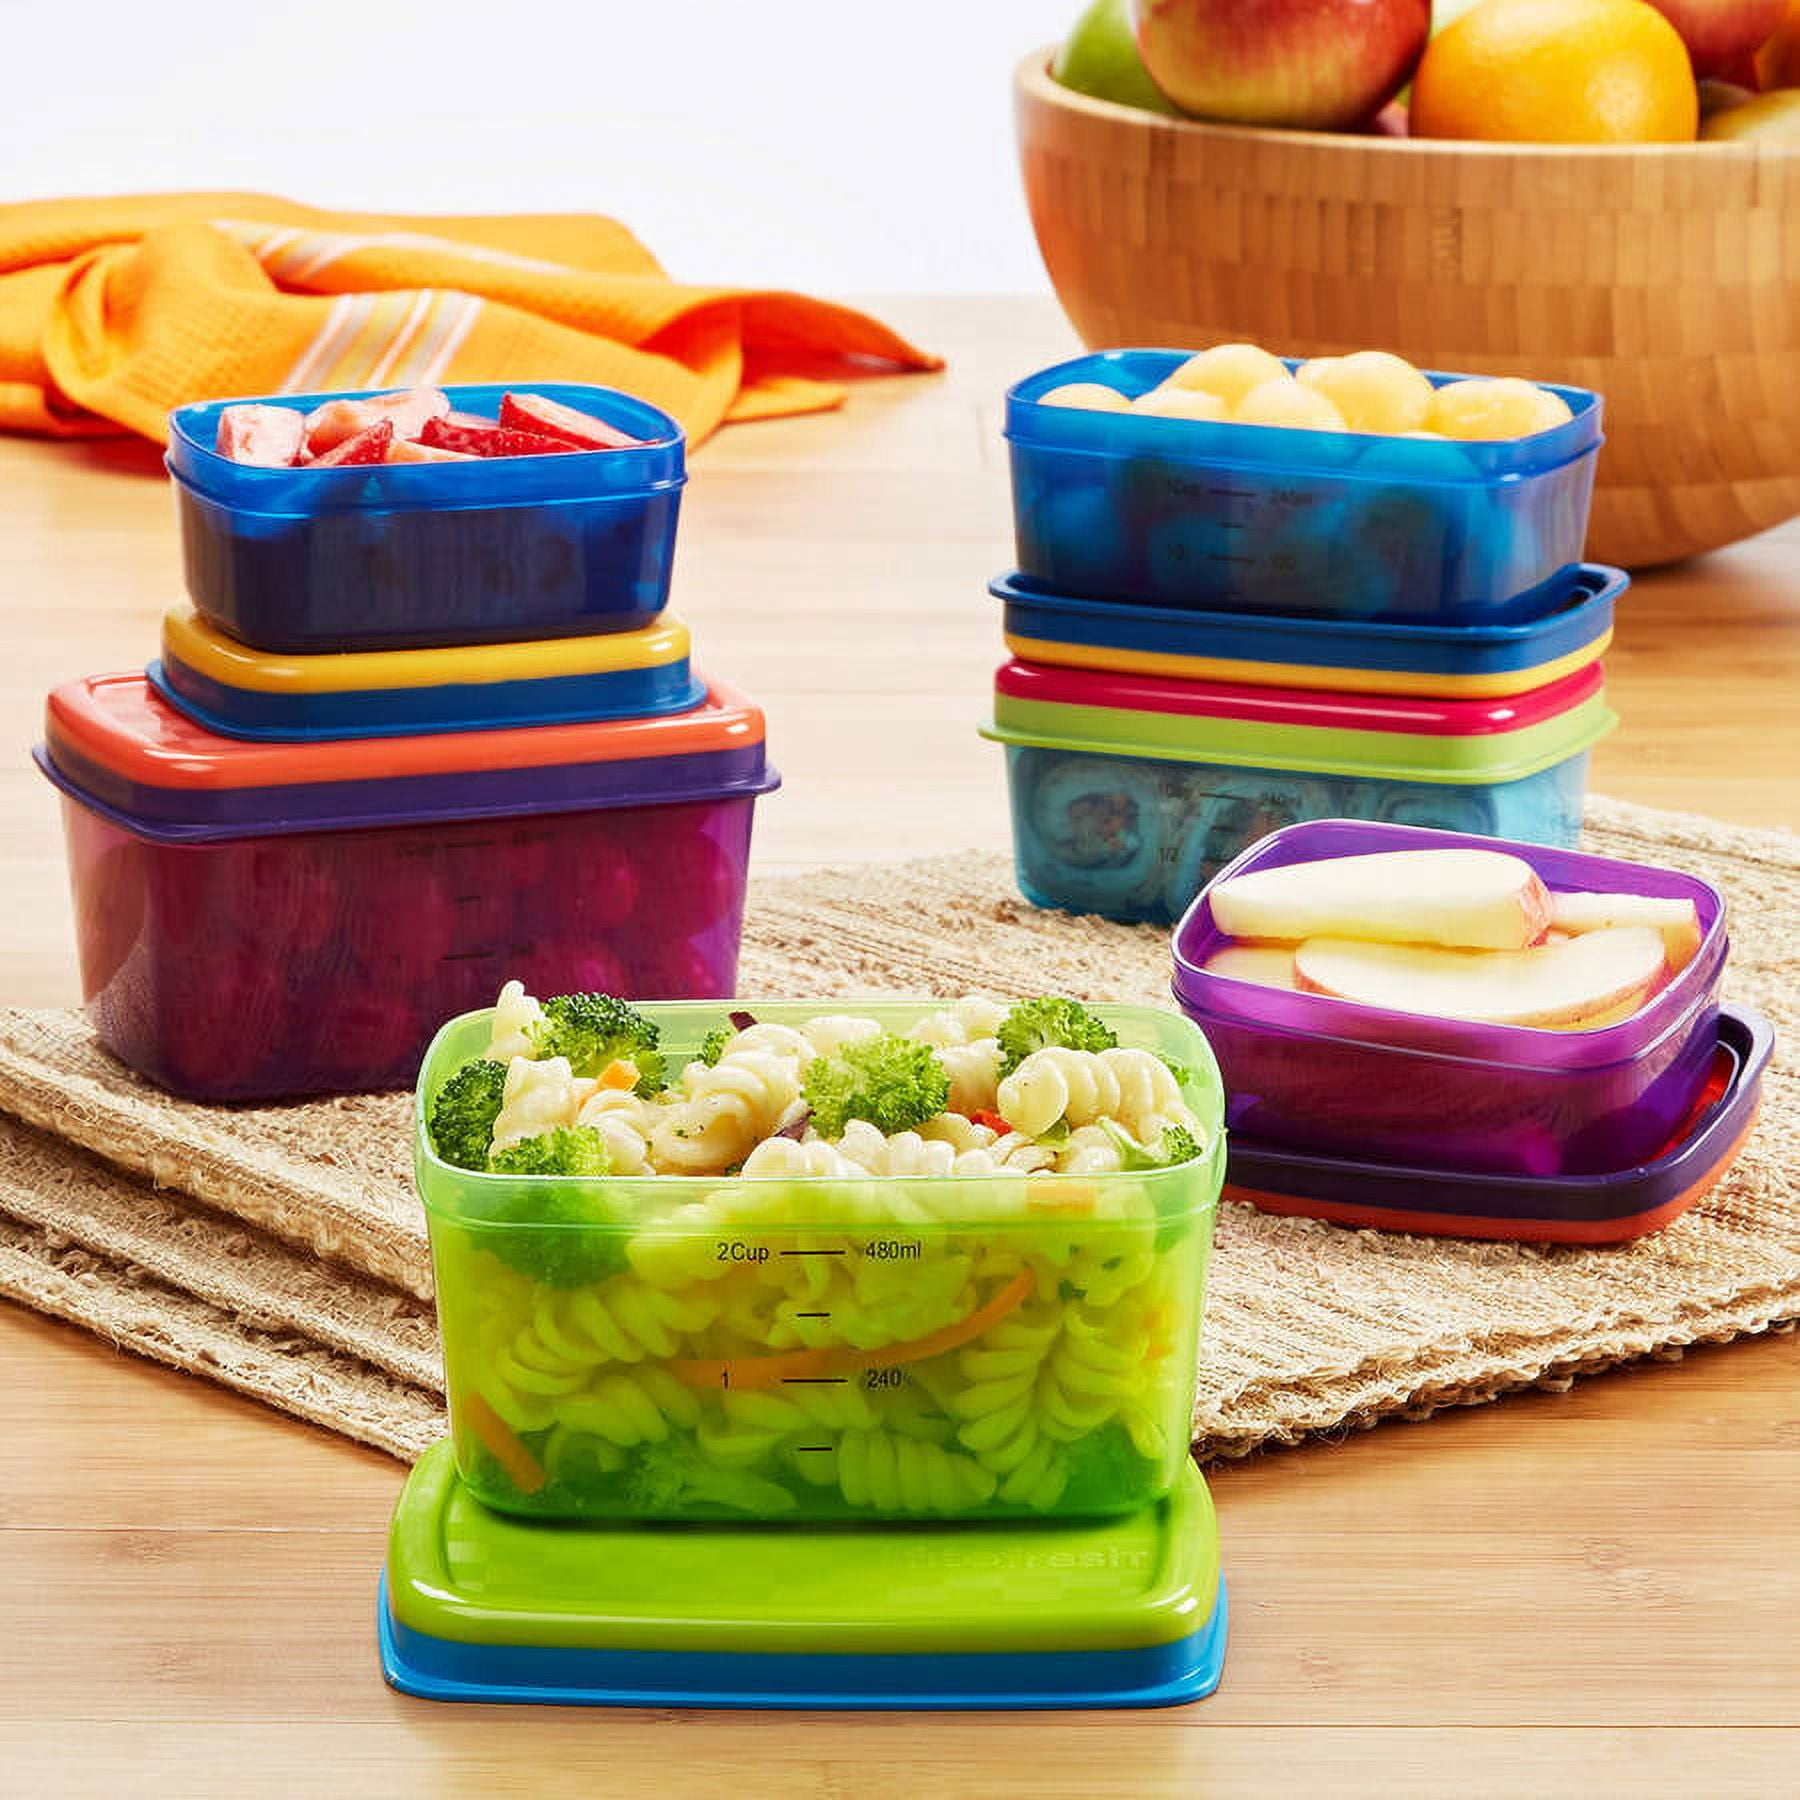 Fit & Fresh Snack Set, 1/2 Cup